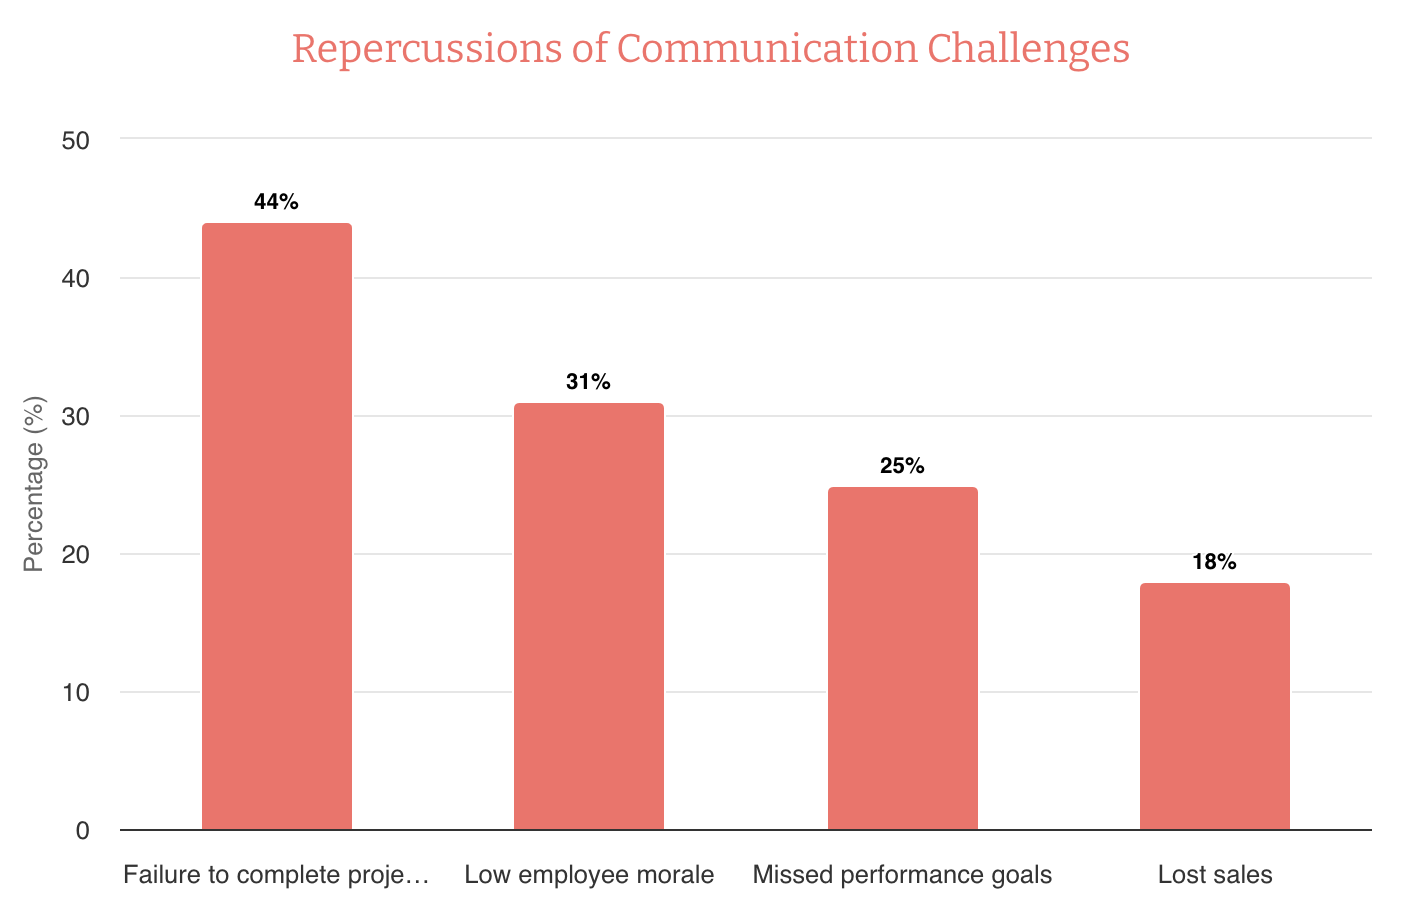 Bar graph showing repercussions of communication challenges